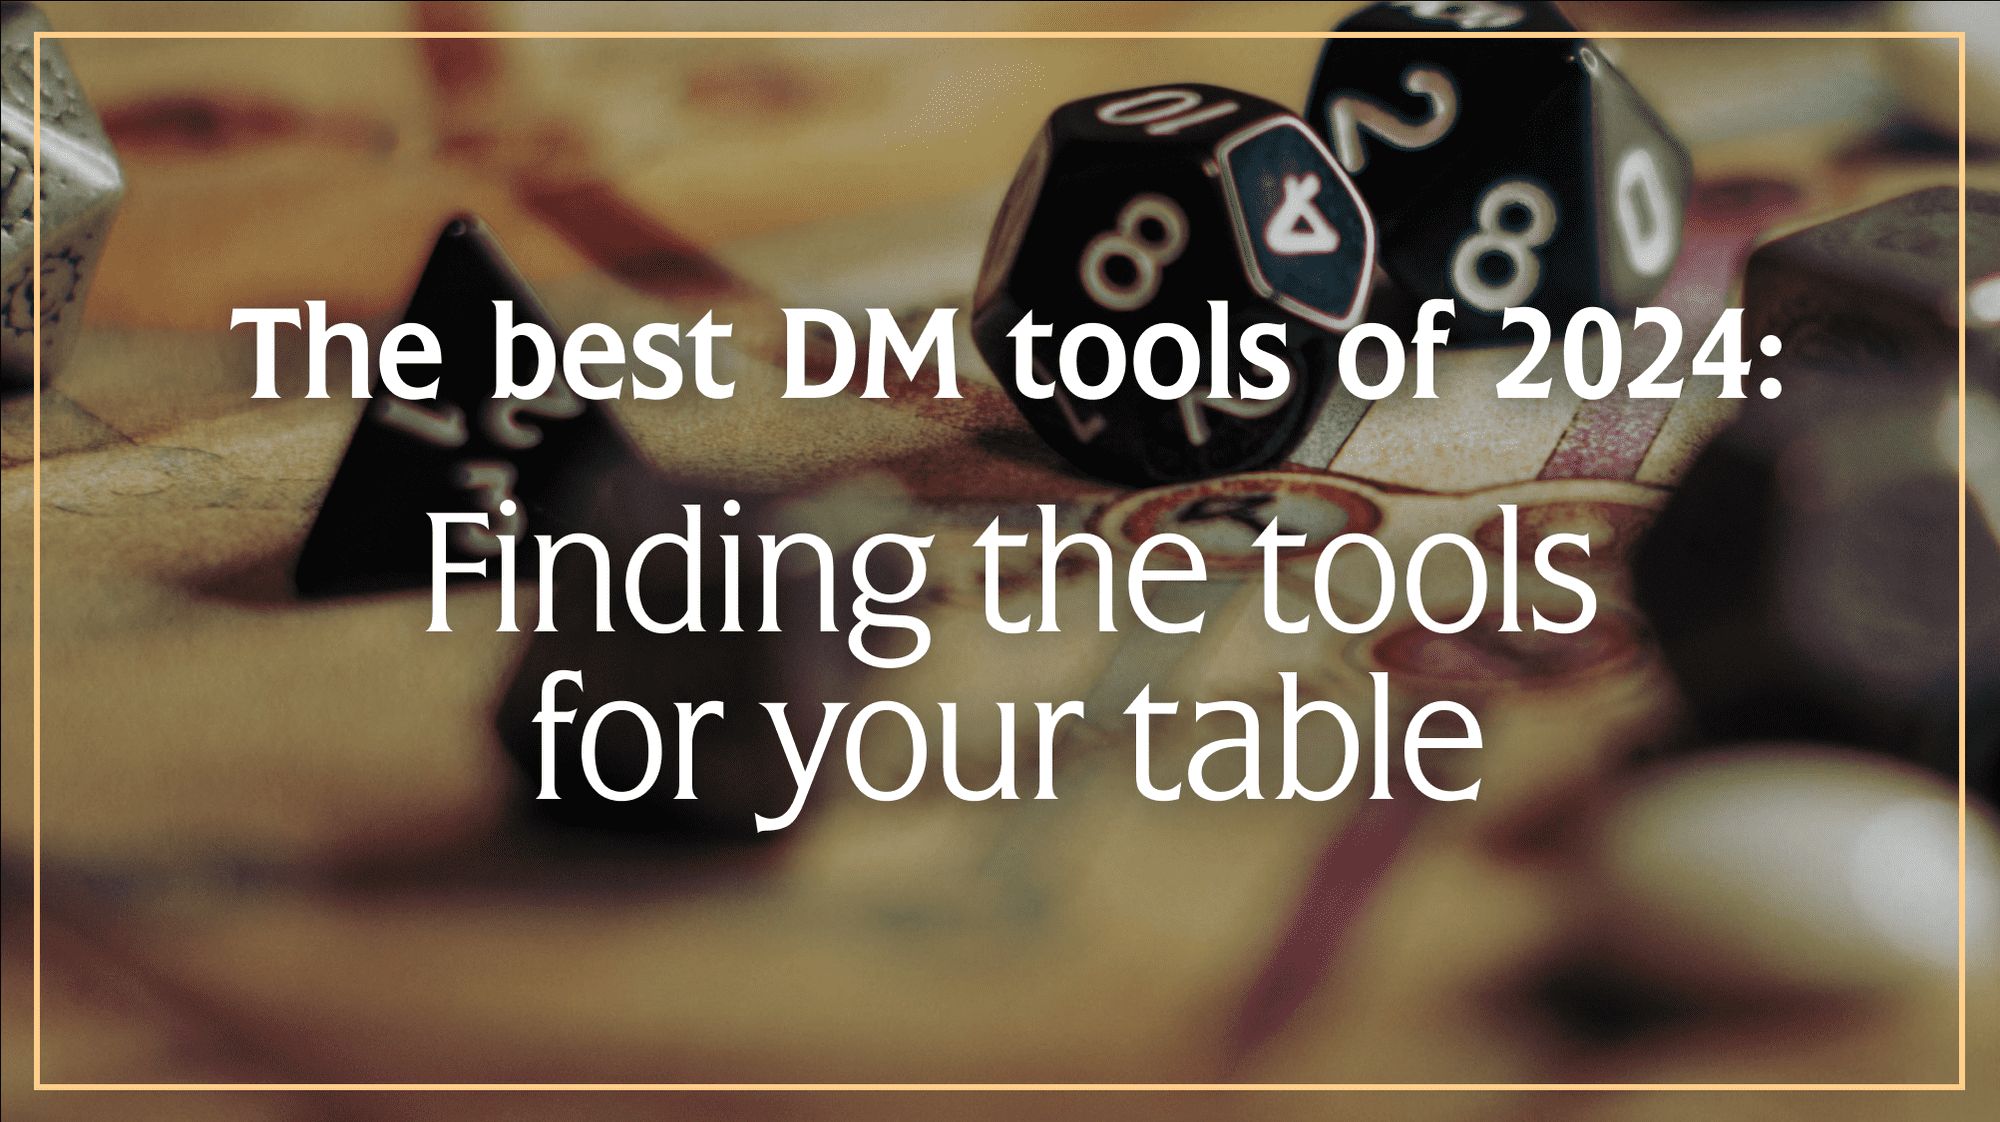 Feature image for The best DM tools of 2024: Finding the tools for your table